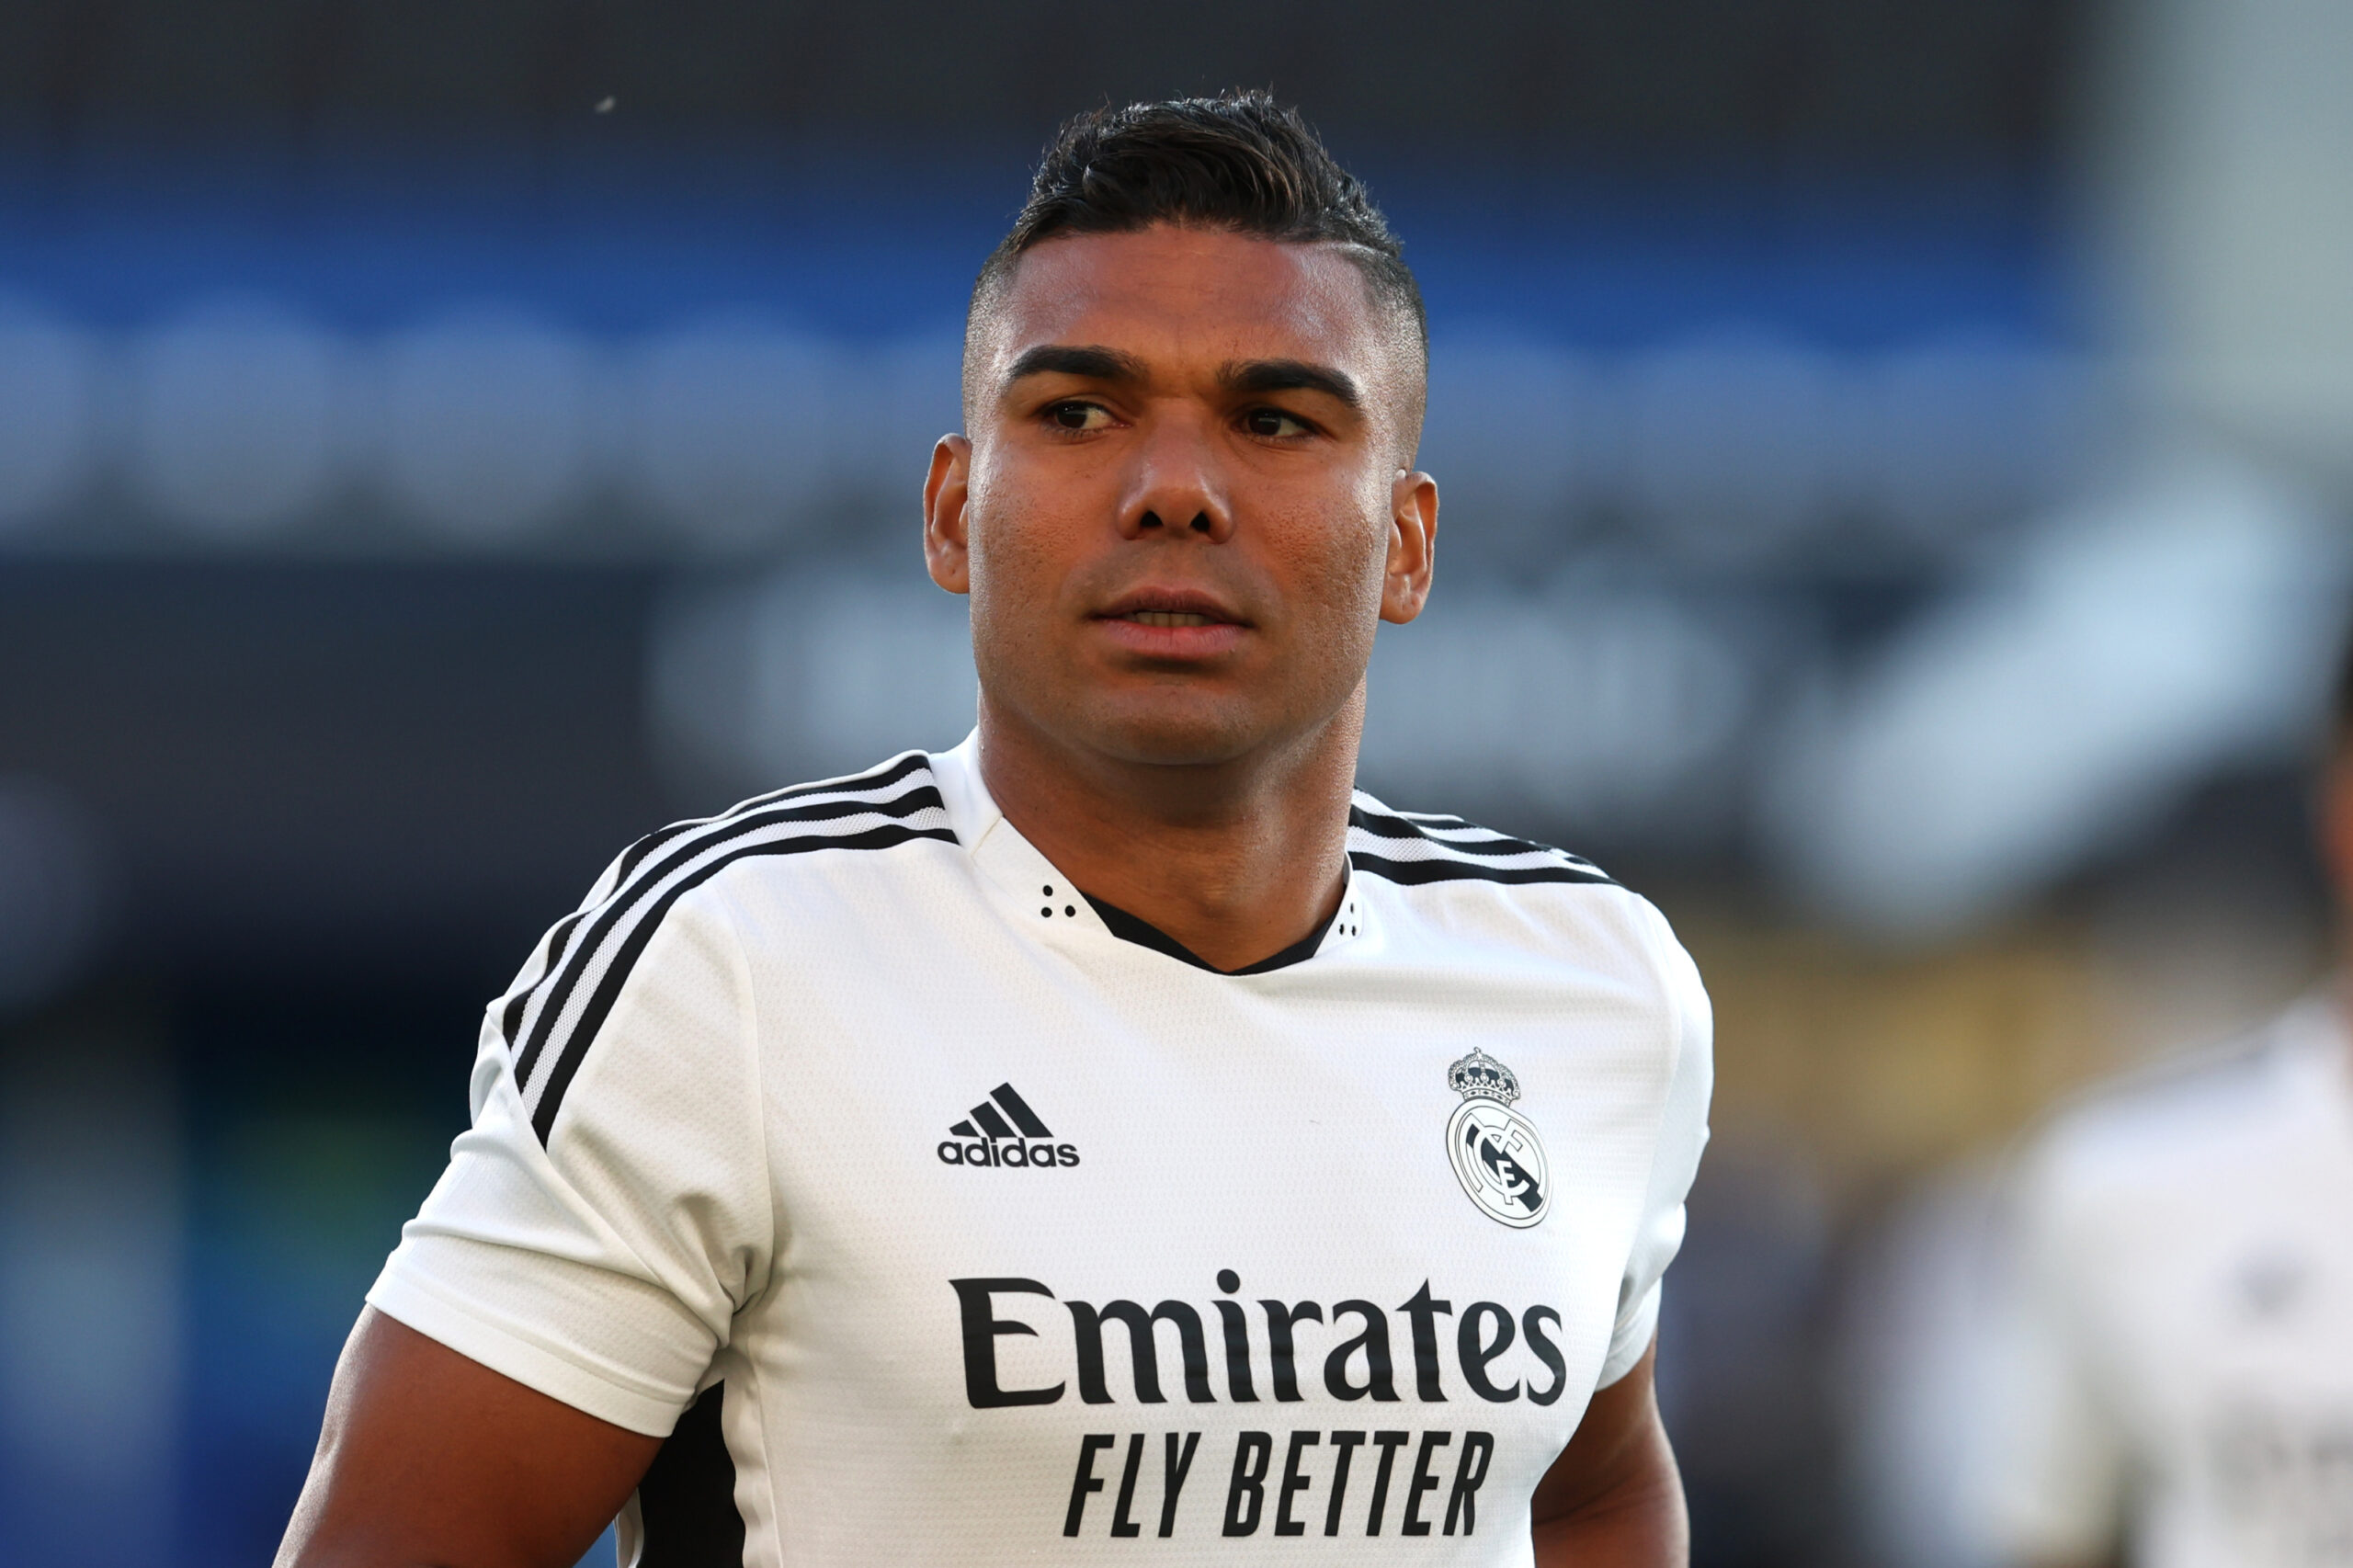 Manchester United close to signing Casemiro from Real Madrid